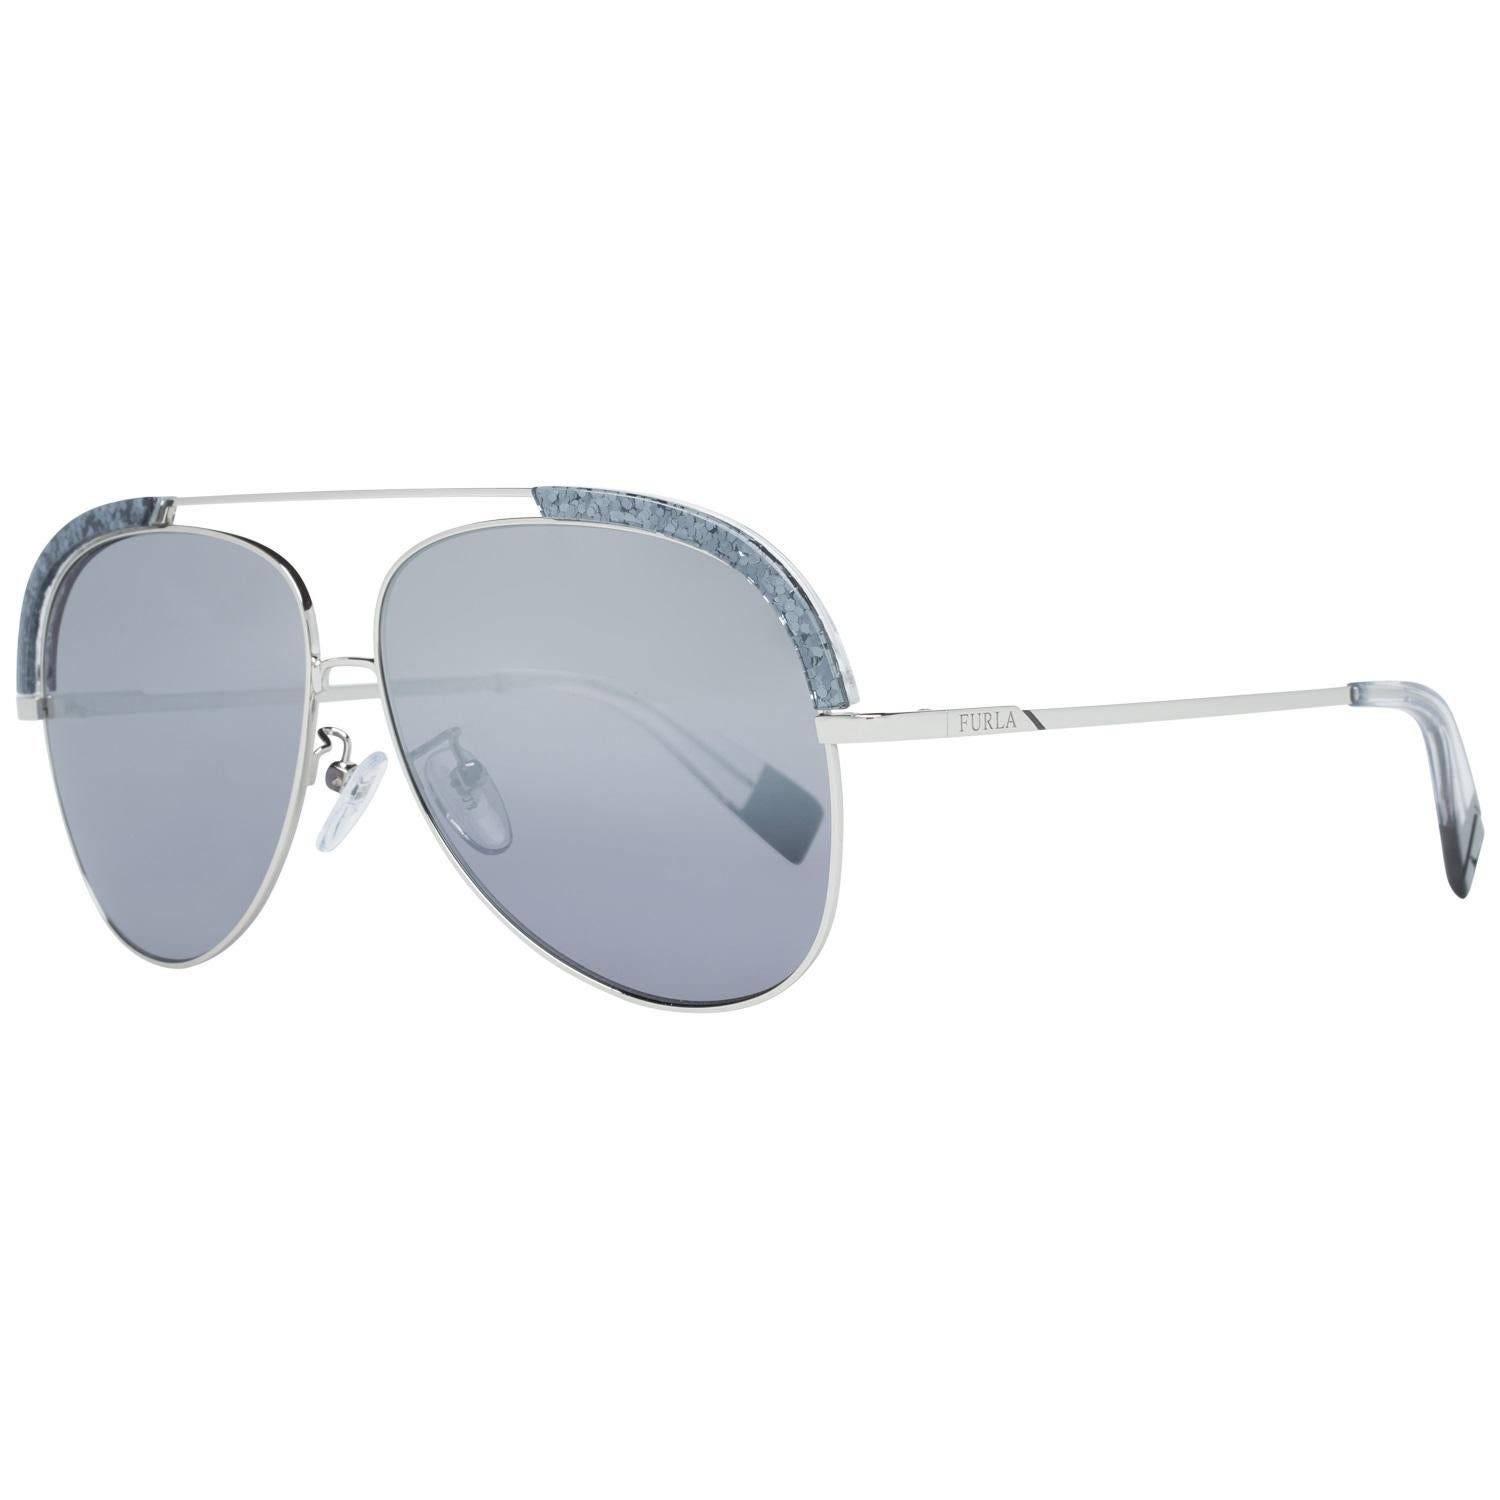 Details

MATERIAL: Metal

COLOR: Silver

MODEL: SFU284 60579X

GENDER: Women

COUNTRY OF MANUFACTURE: China

TYPE: Sunglasses

ORIGINAL CASE?: Yes

STYLE: Aviator

OCCASION: Casual

FEATURES: Lightweight

LENS COLOR: Silver

LENS TECHNOLOGY: